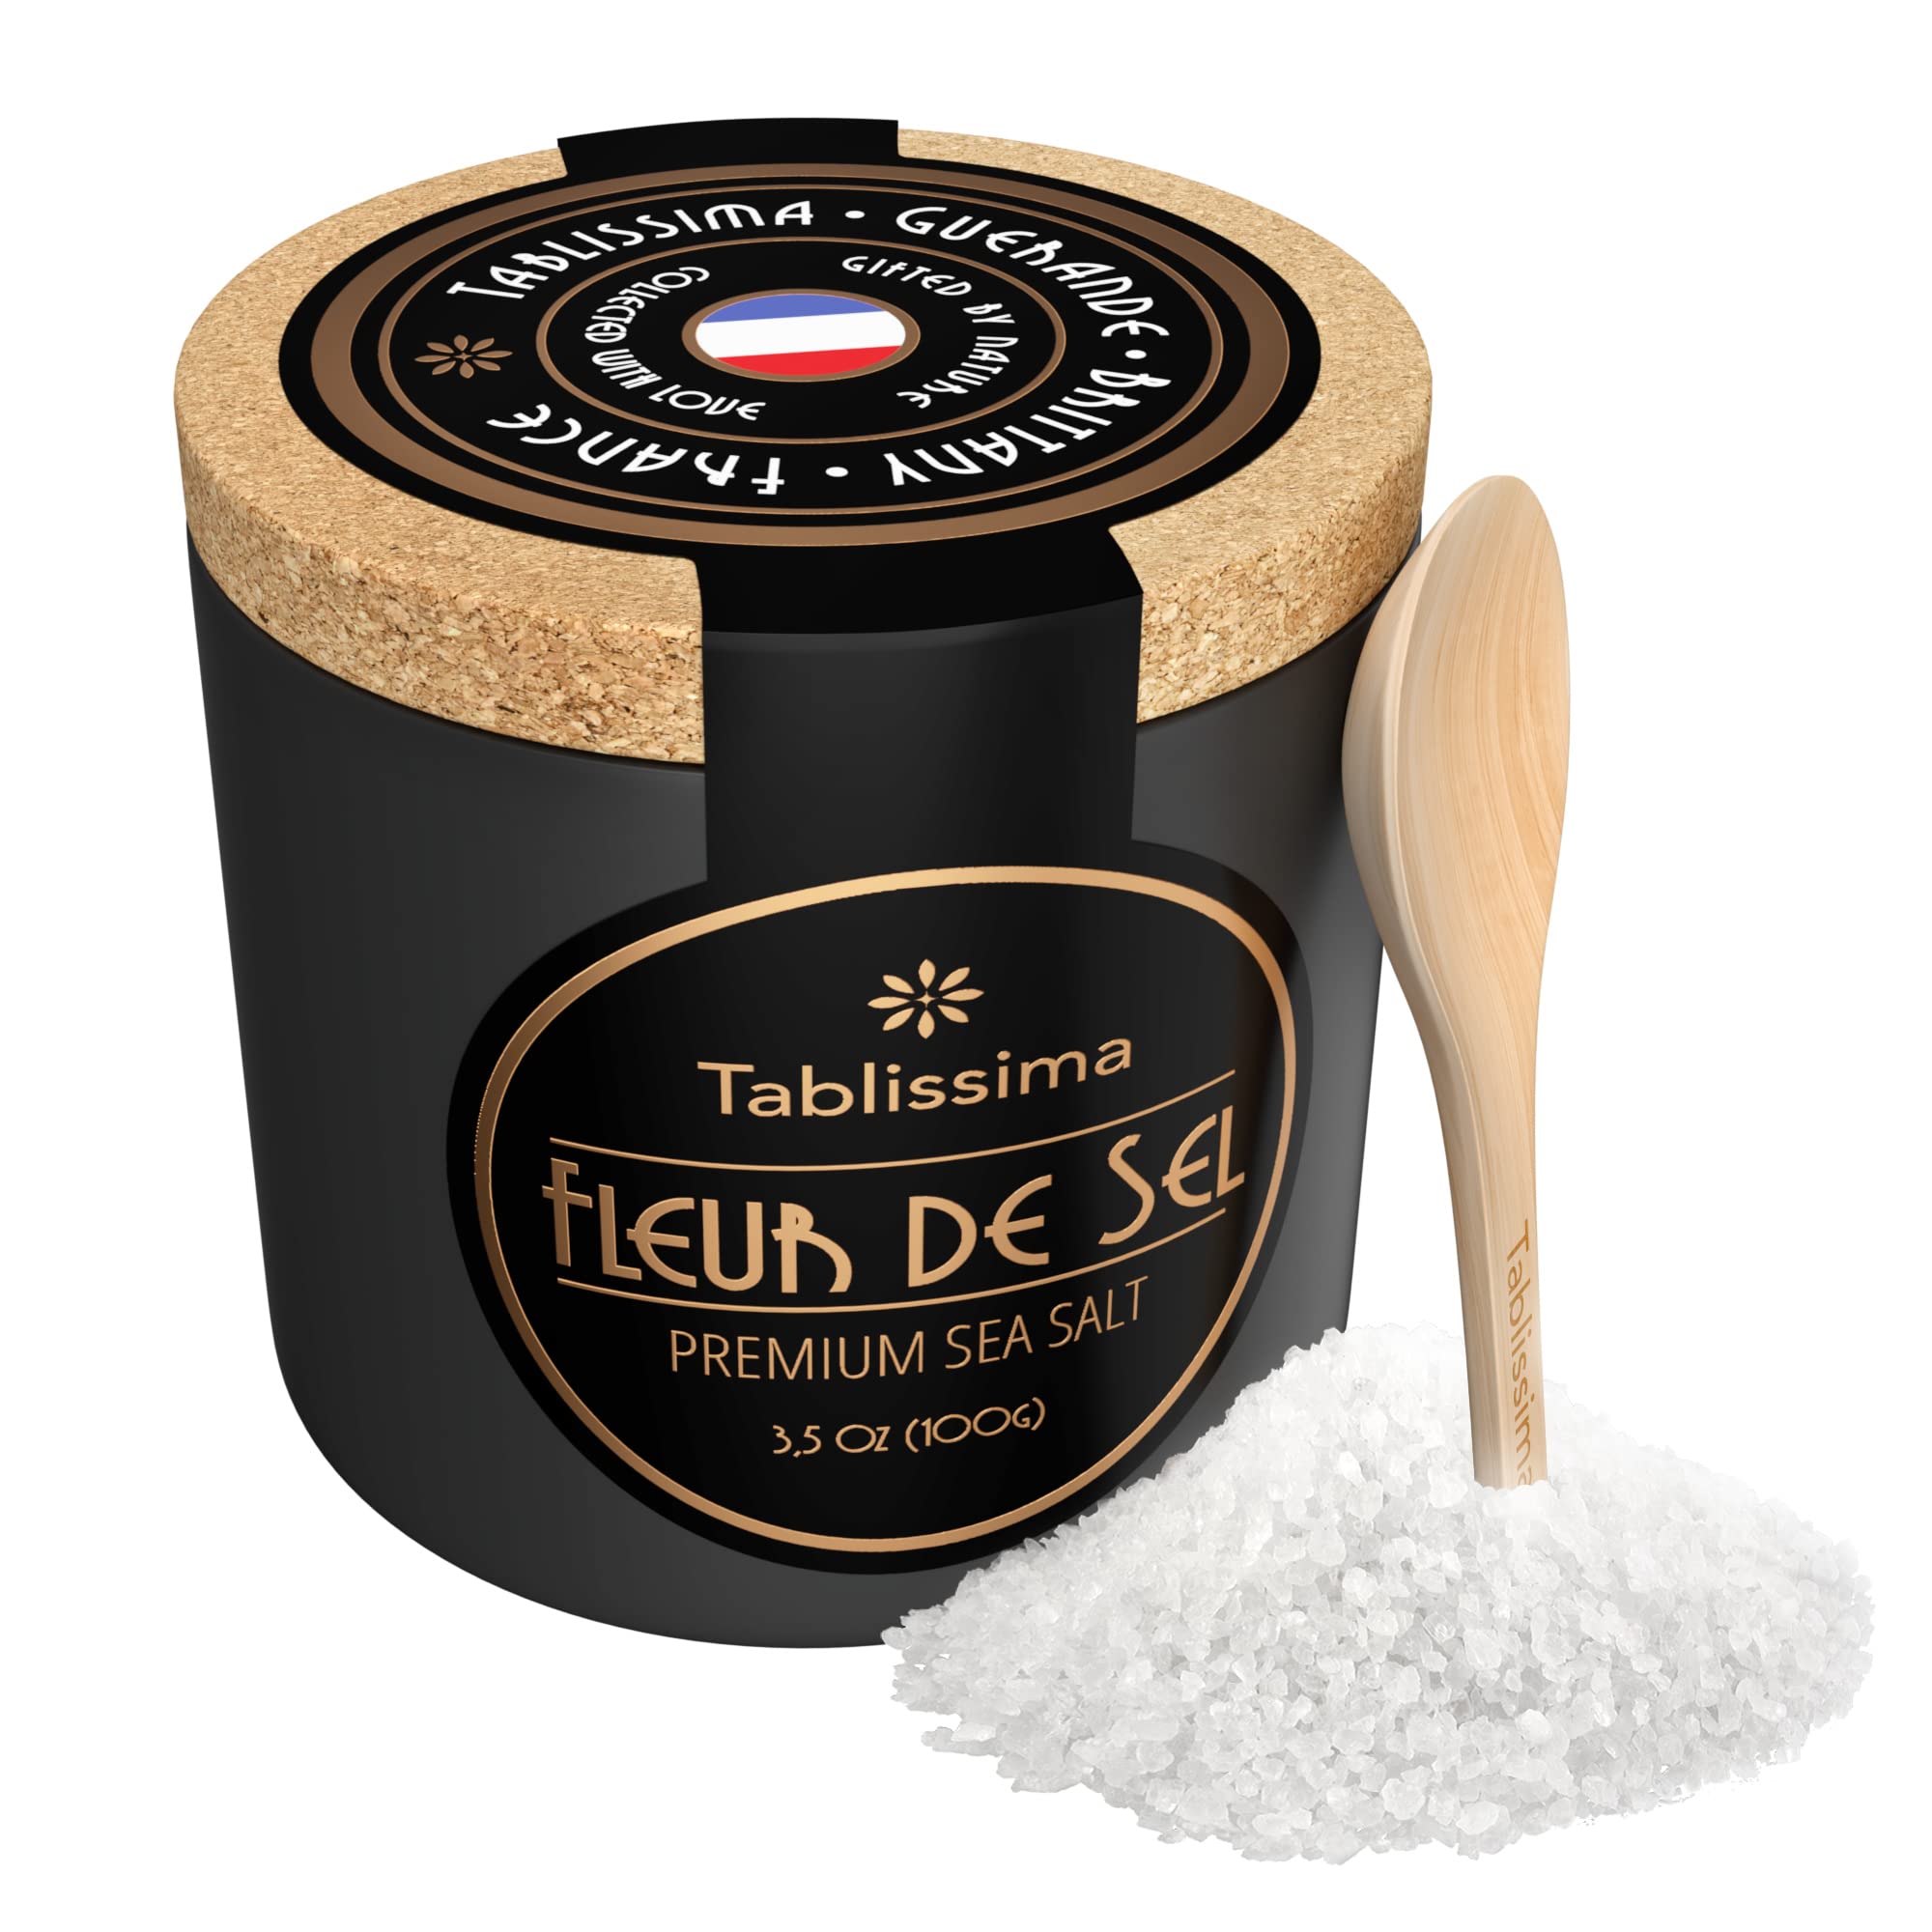 Tablissima Fleur de Sel from Guerande - Premium Salt from France - Hand  Harvested - 100 percent Natural - Trusted by the best Chefs - 3oz Oz. (86